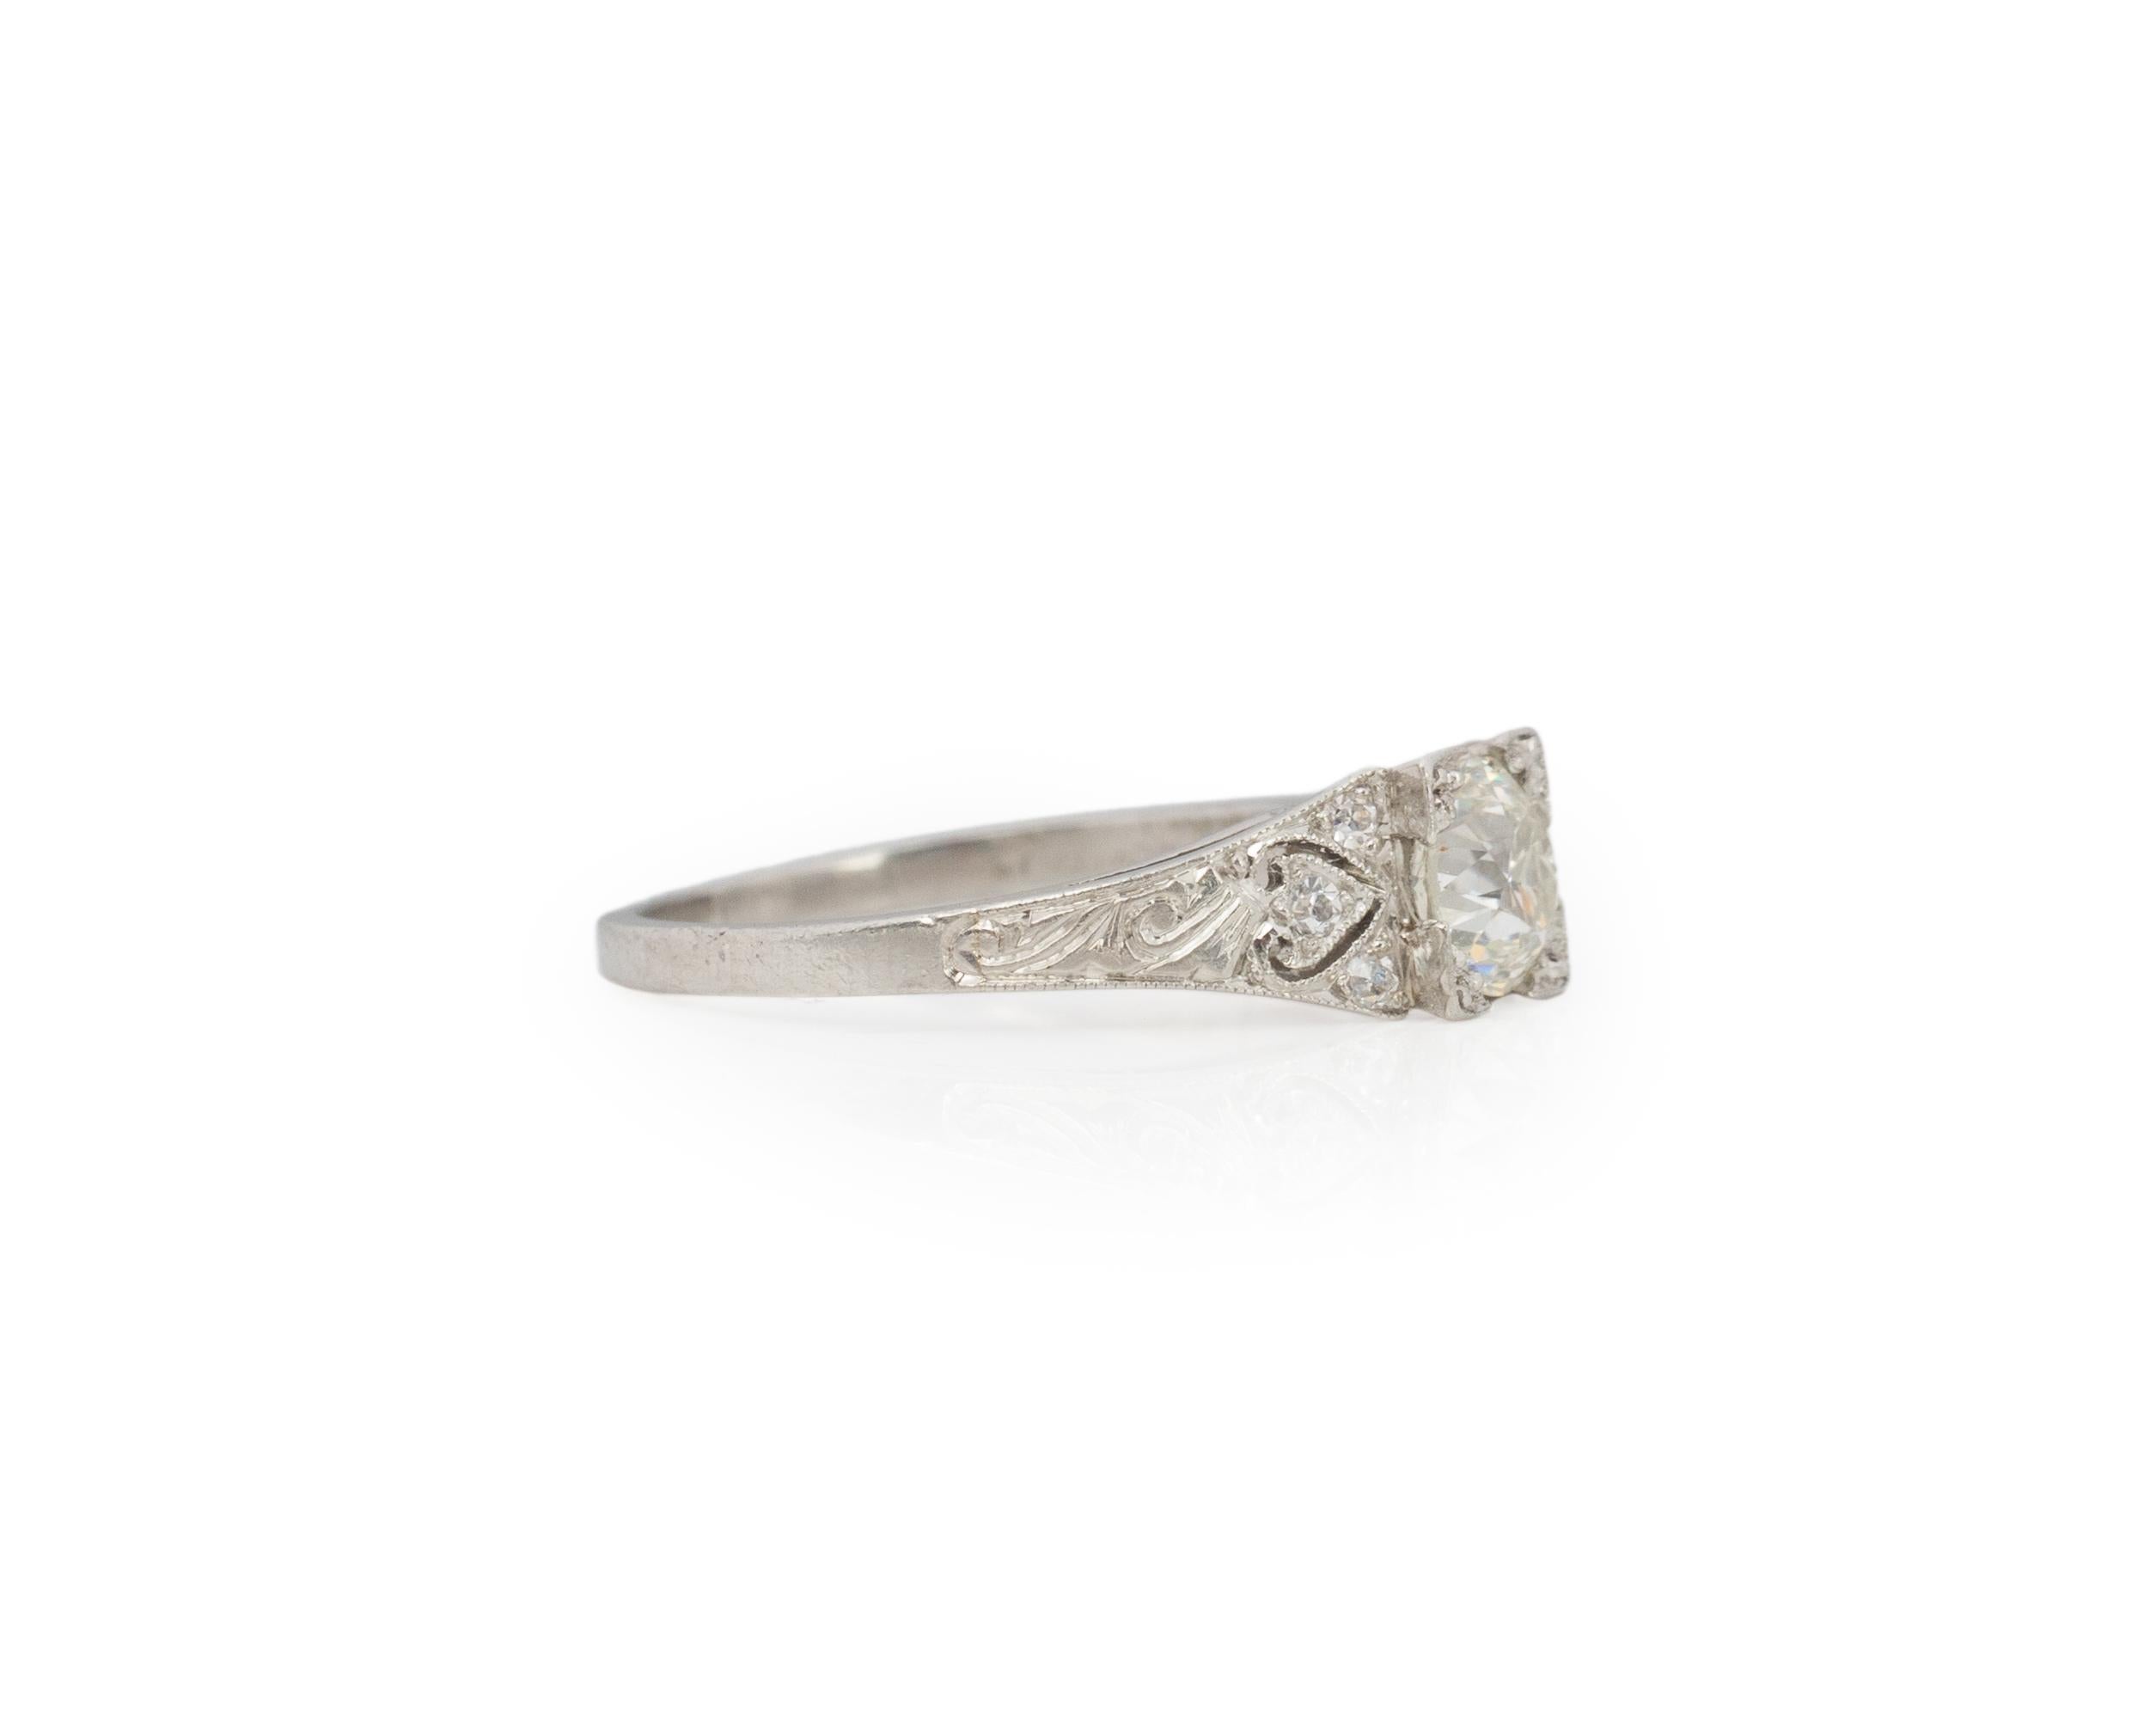 Ring Size: 5.5
Metal Type: Platinum [Hallmarked, and Tested]
Weight: 3.7 grams

Center Diamond Details:
Weight: .65ct
Cut: Old European brilliant
Color: I
Clarity: VS1

Side Diamond Details:
Weight: .10ct, total
Cut: Old European brilliant
Color: